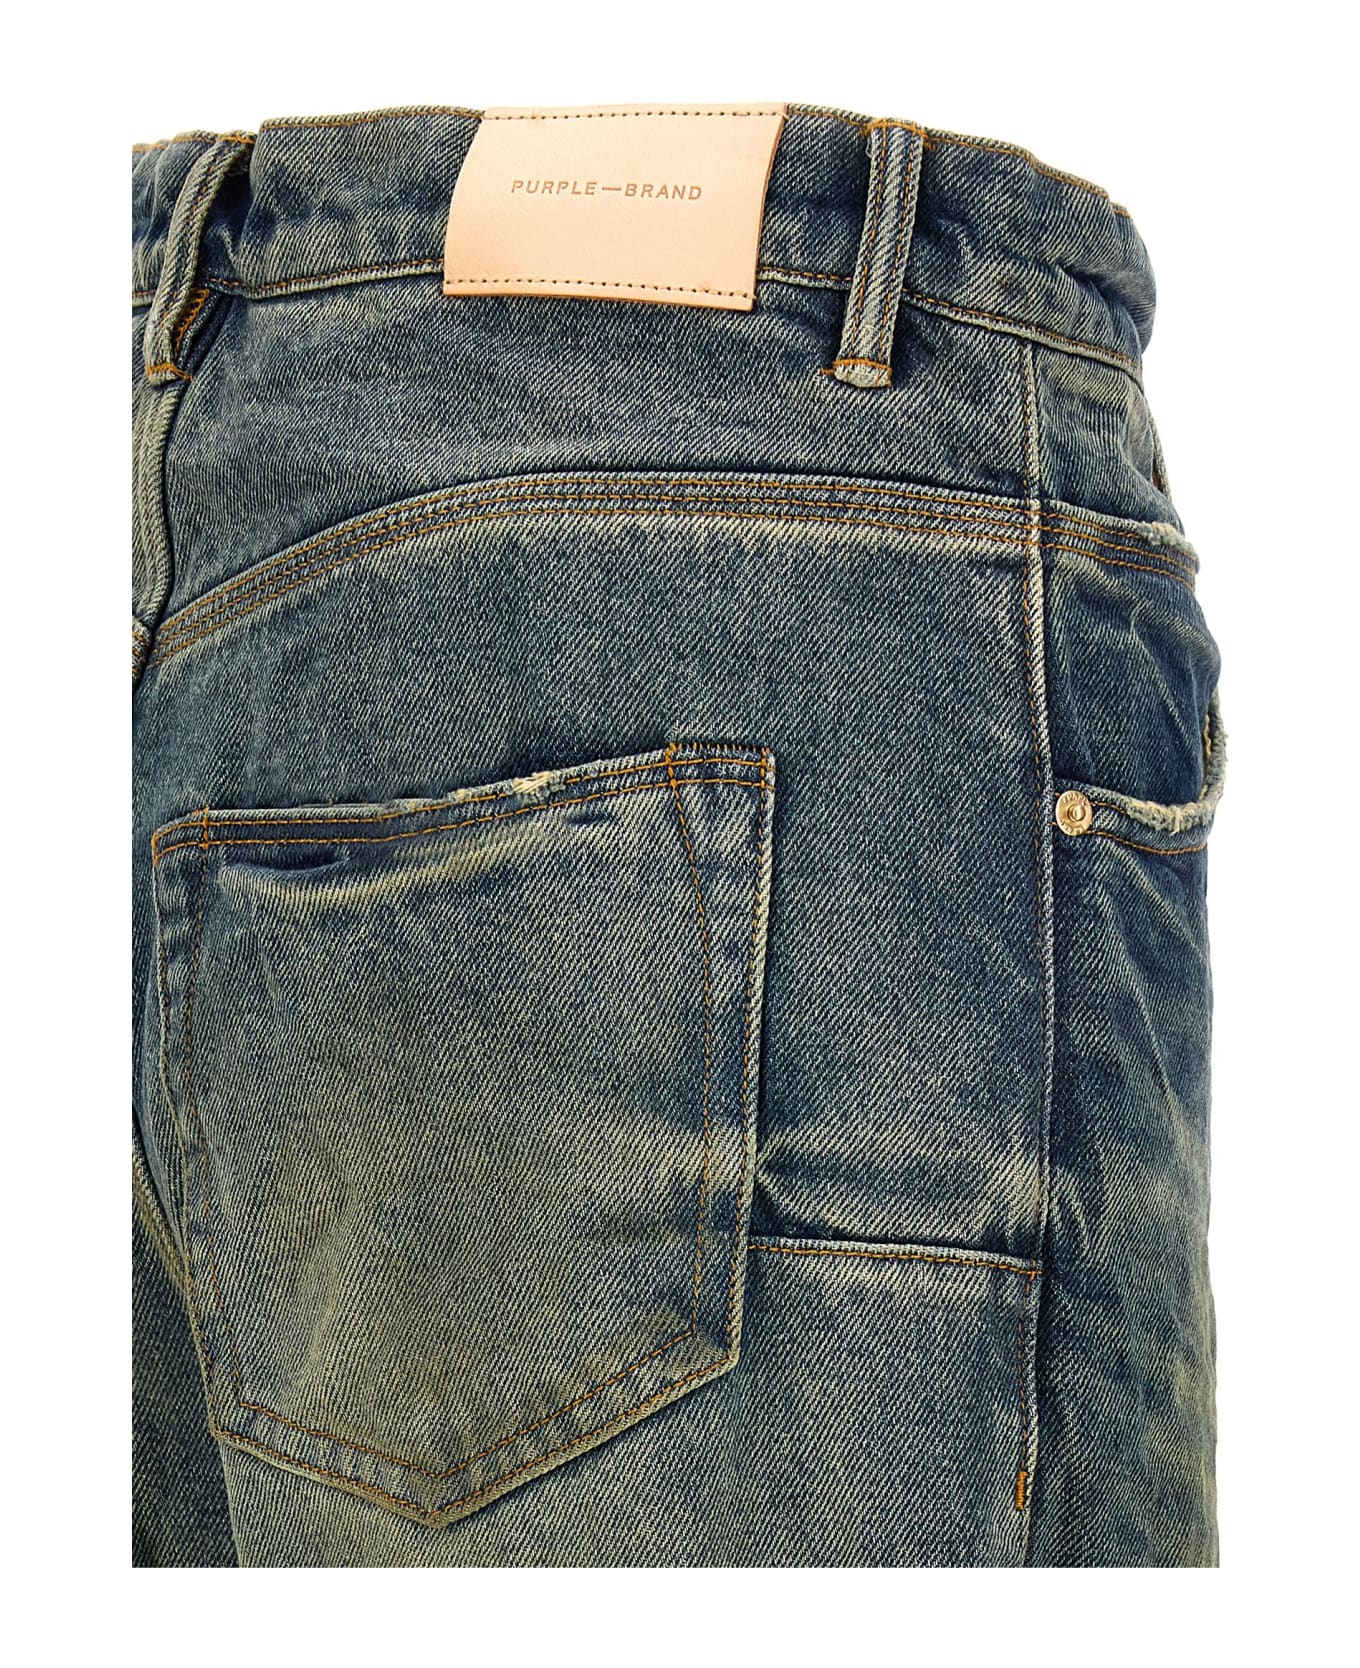 Purple Brand 'relaxed Vintage Dirty' Jeans - Blue デニム